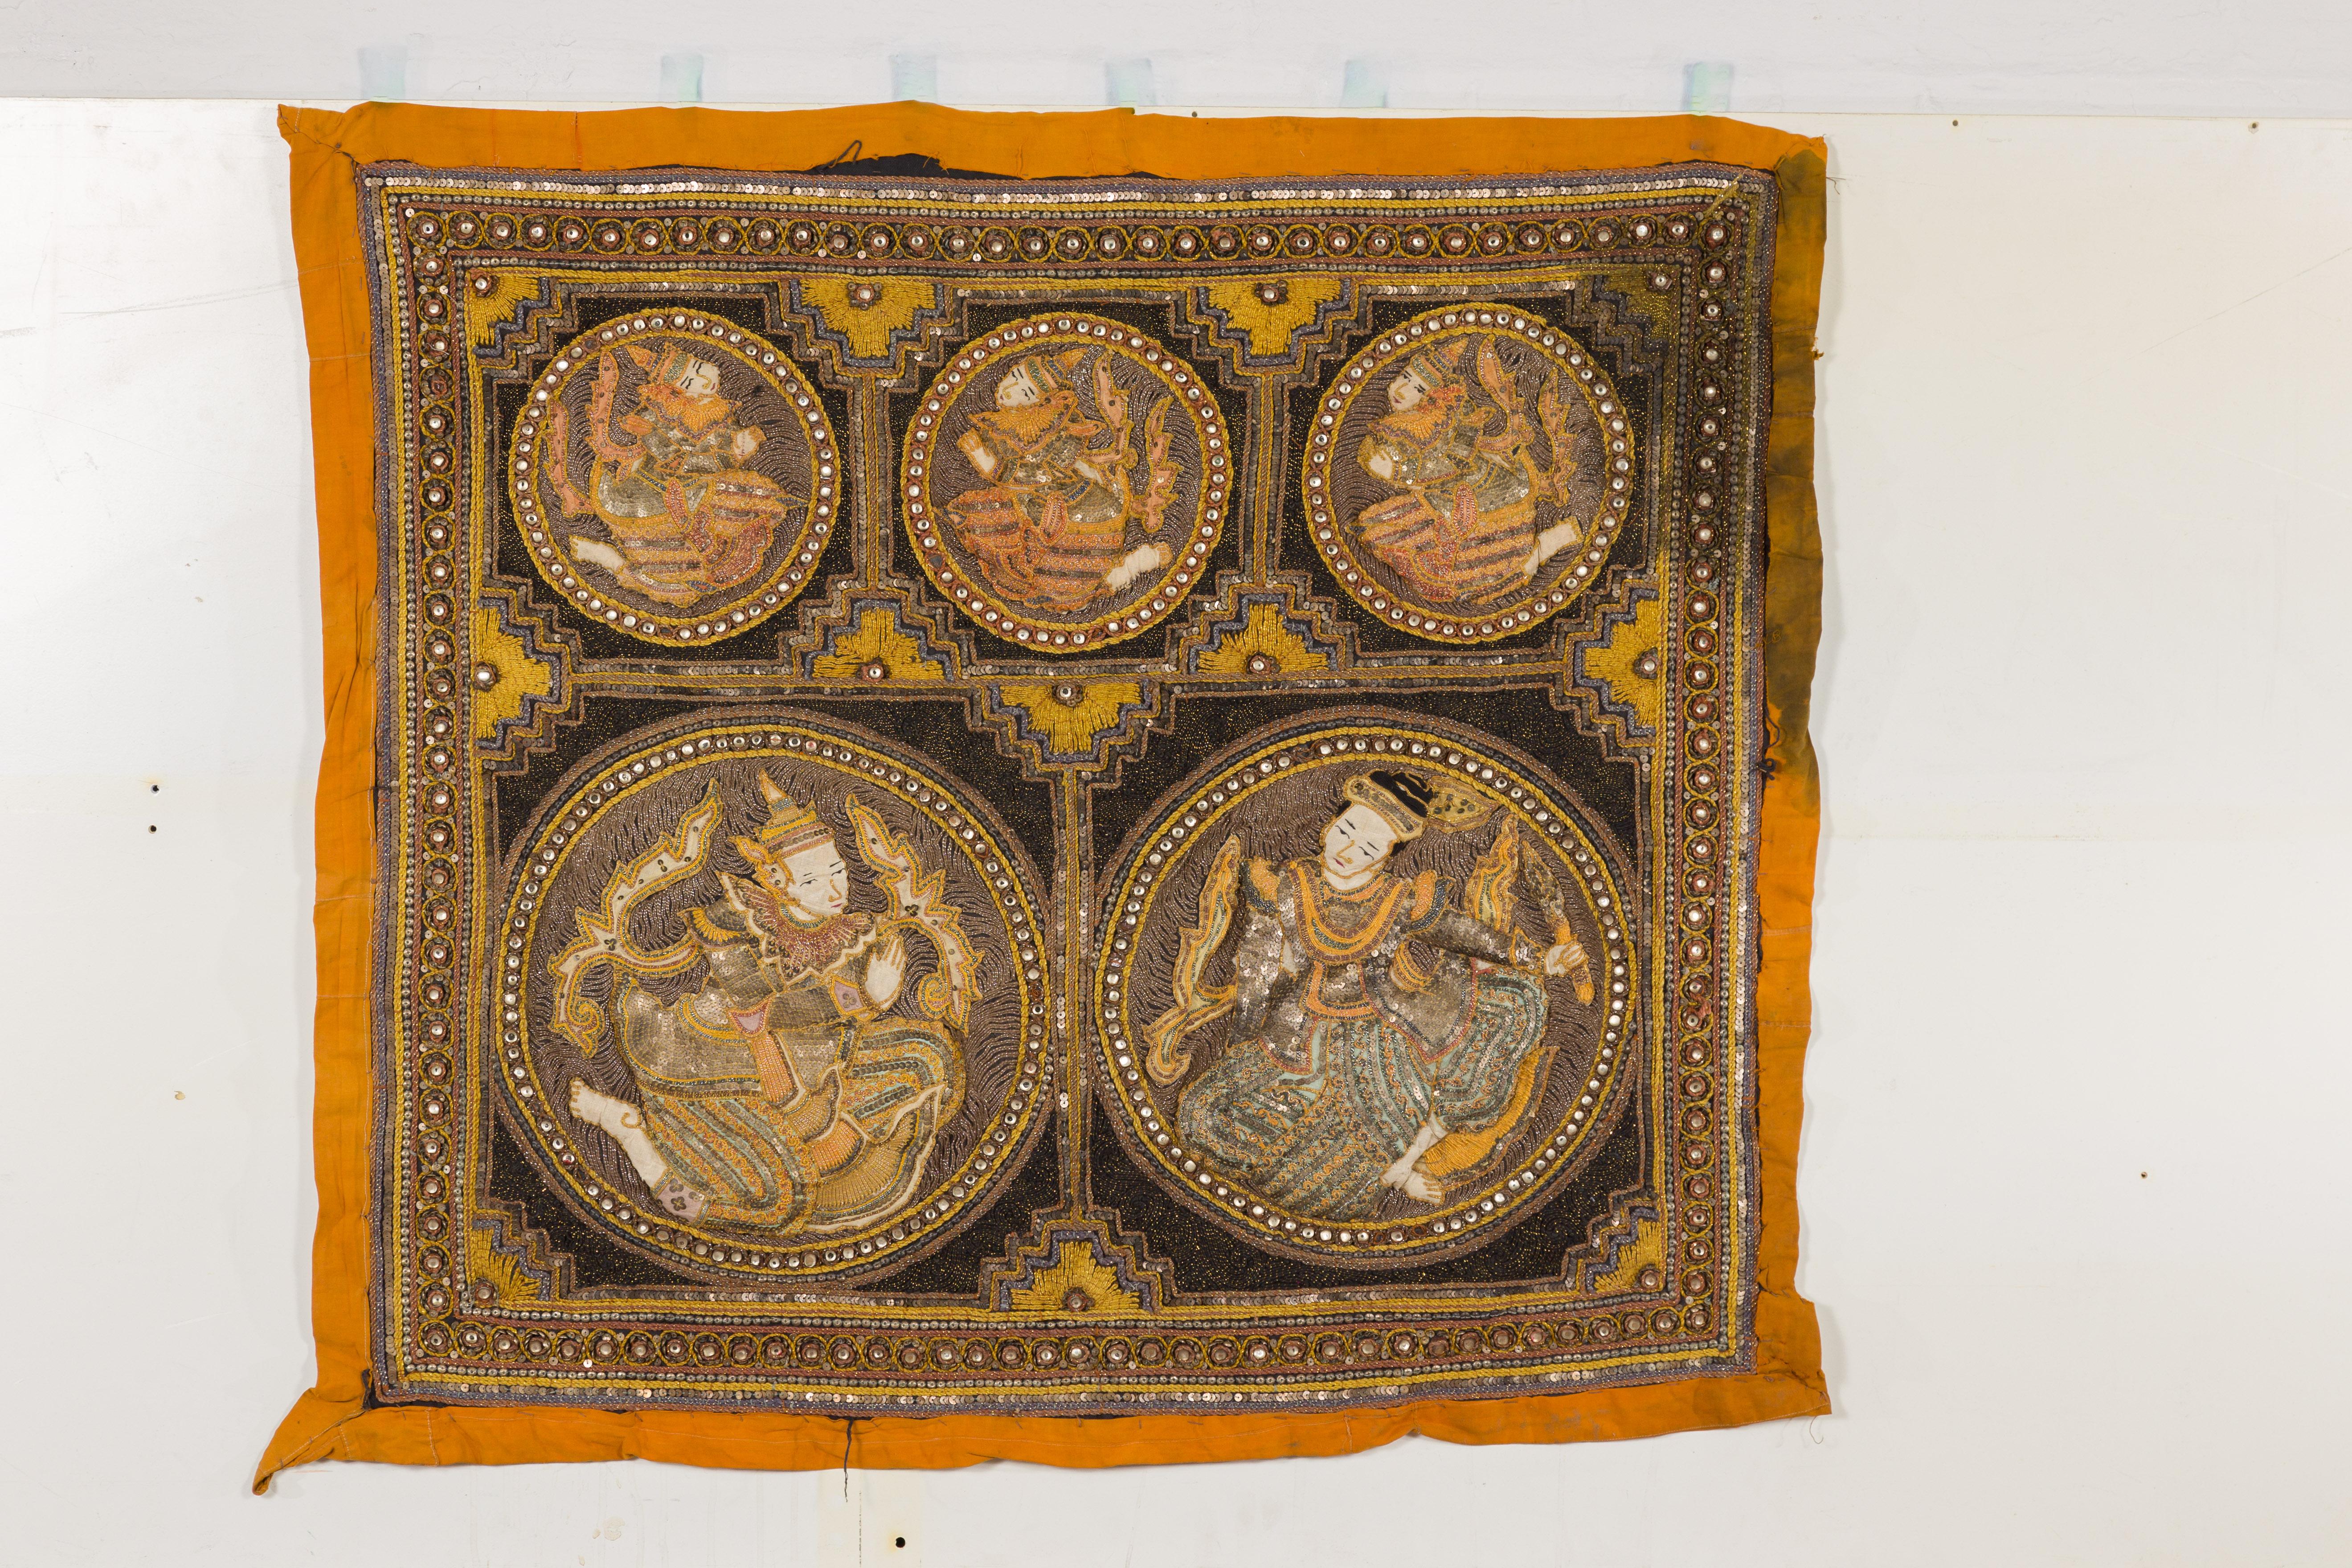 A 19th century Burmese Kalaga tapestry with stones, sequins and golden thread. Immerse yourself in the grandeur of Burmese craftsmanship with this captivating 19th-century Kalaga tapestry. A cultural treasure from Burma (now Myanmar), this tapestry